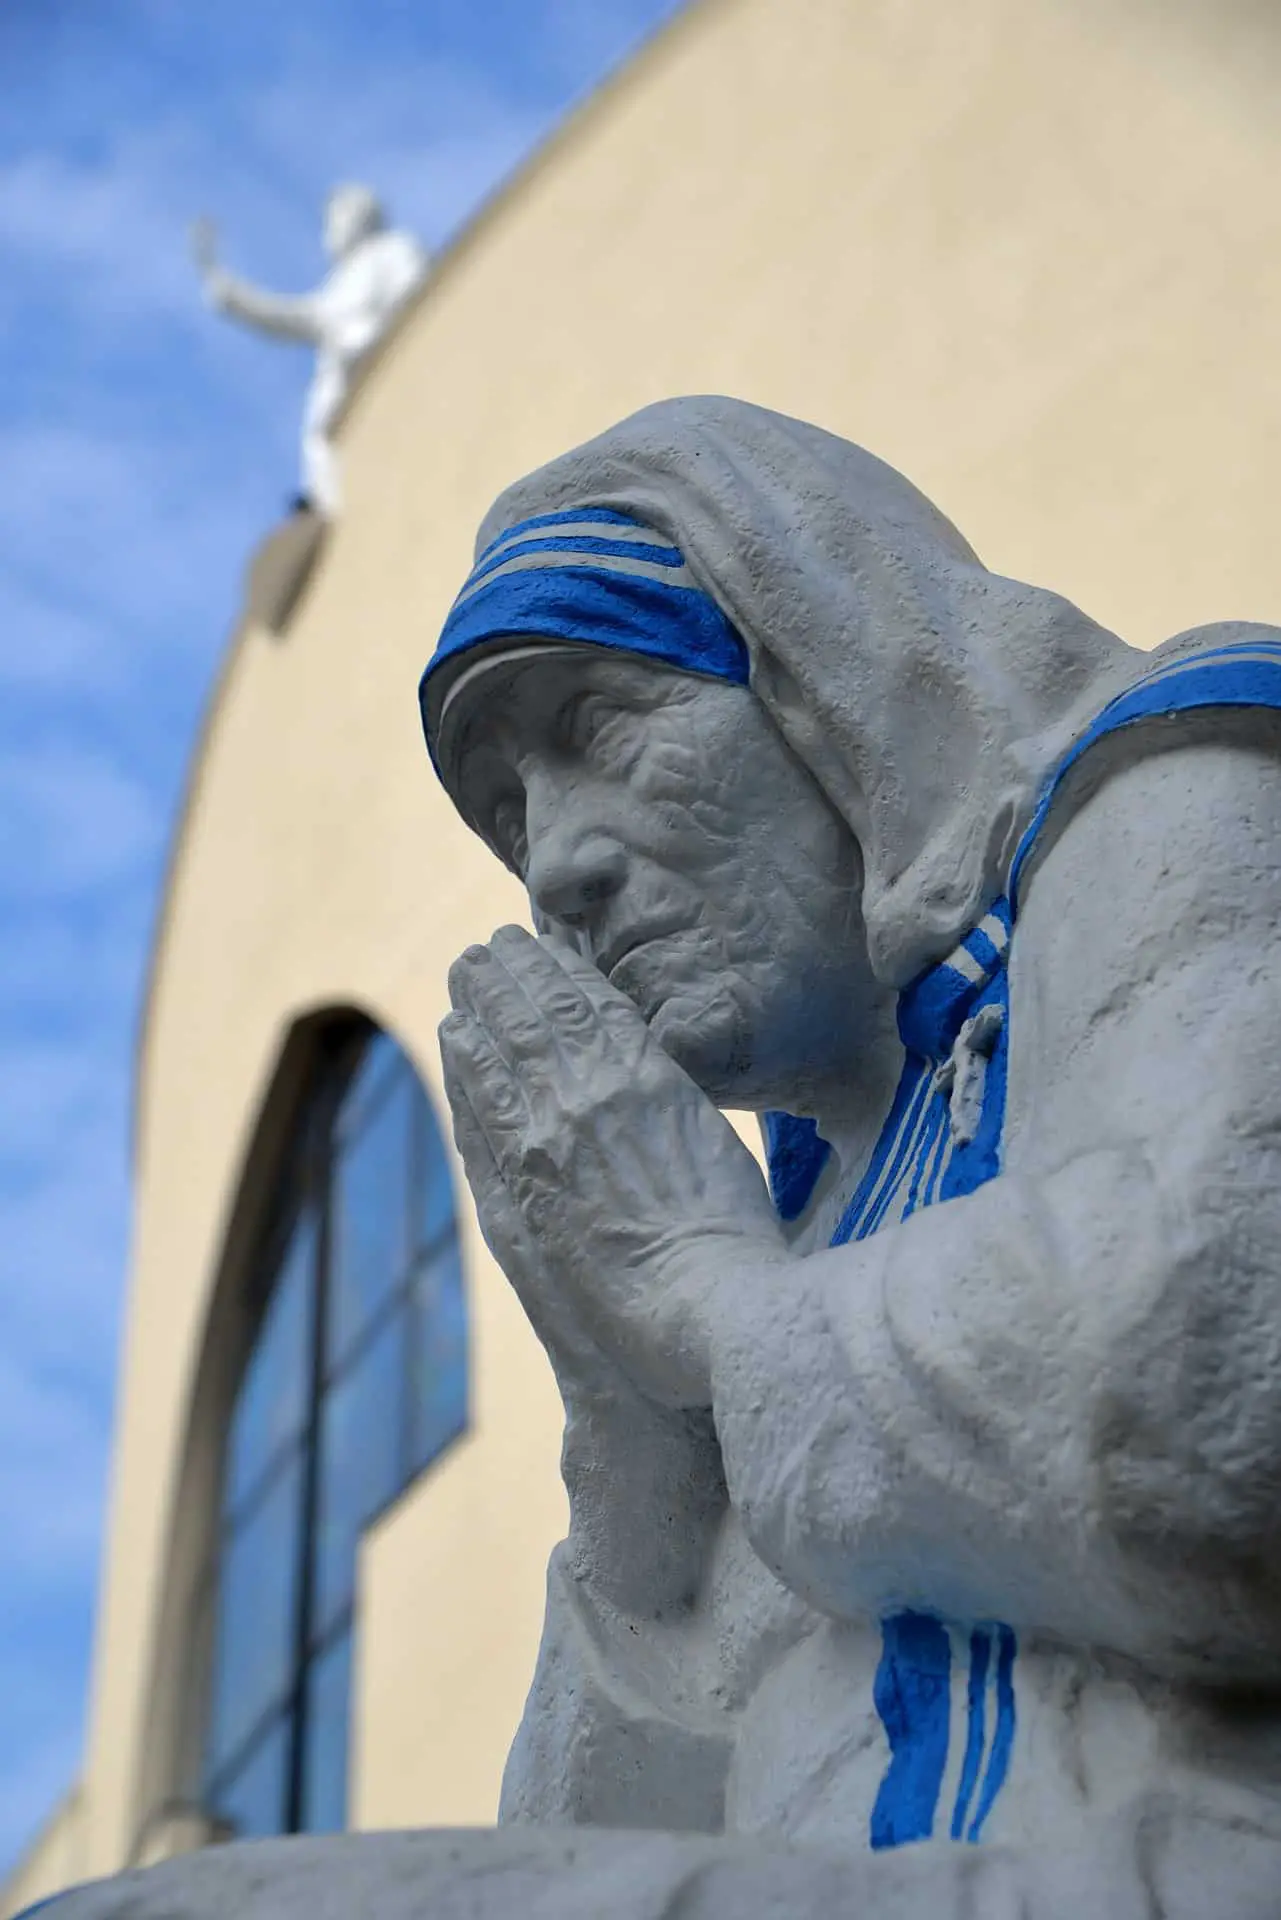 30 Contagious Mother Teresa Quotes on Love, Kindness & Her Own Personal Values